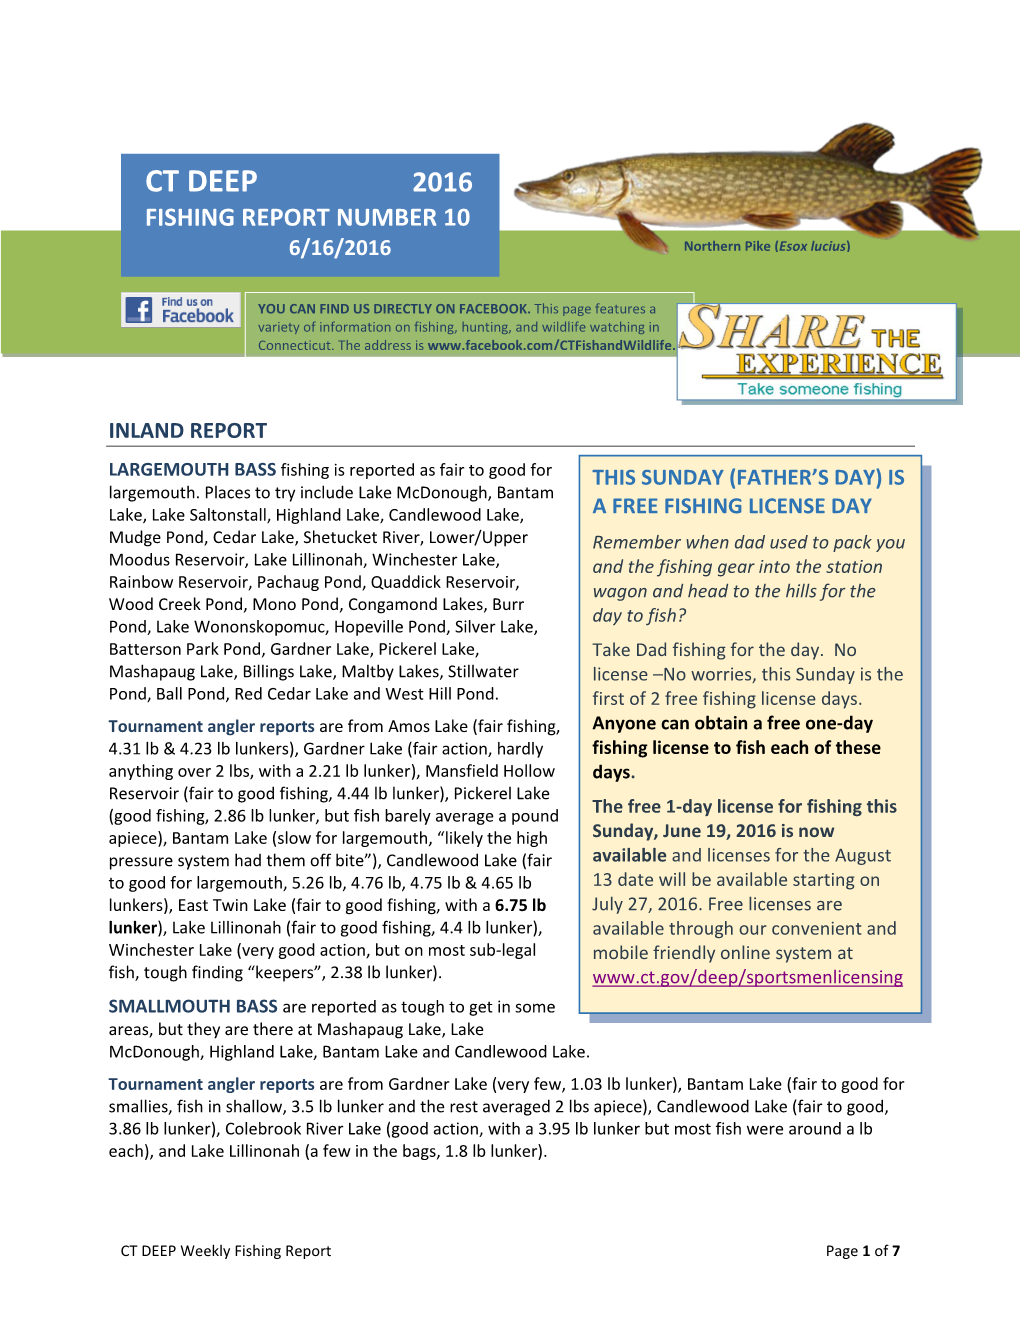 CT DEEP 2016 FISHING REPORT NUMBER 10 6/16/2016 Northern Pike (Esox Lucius)